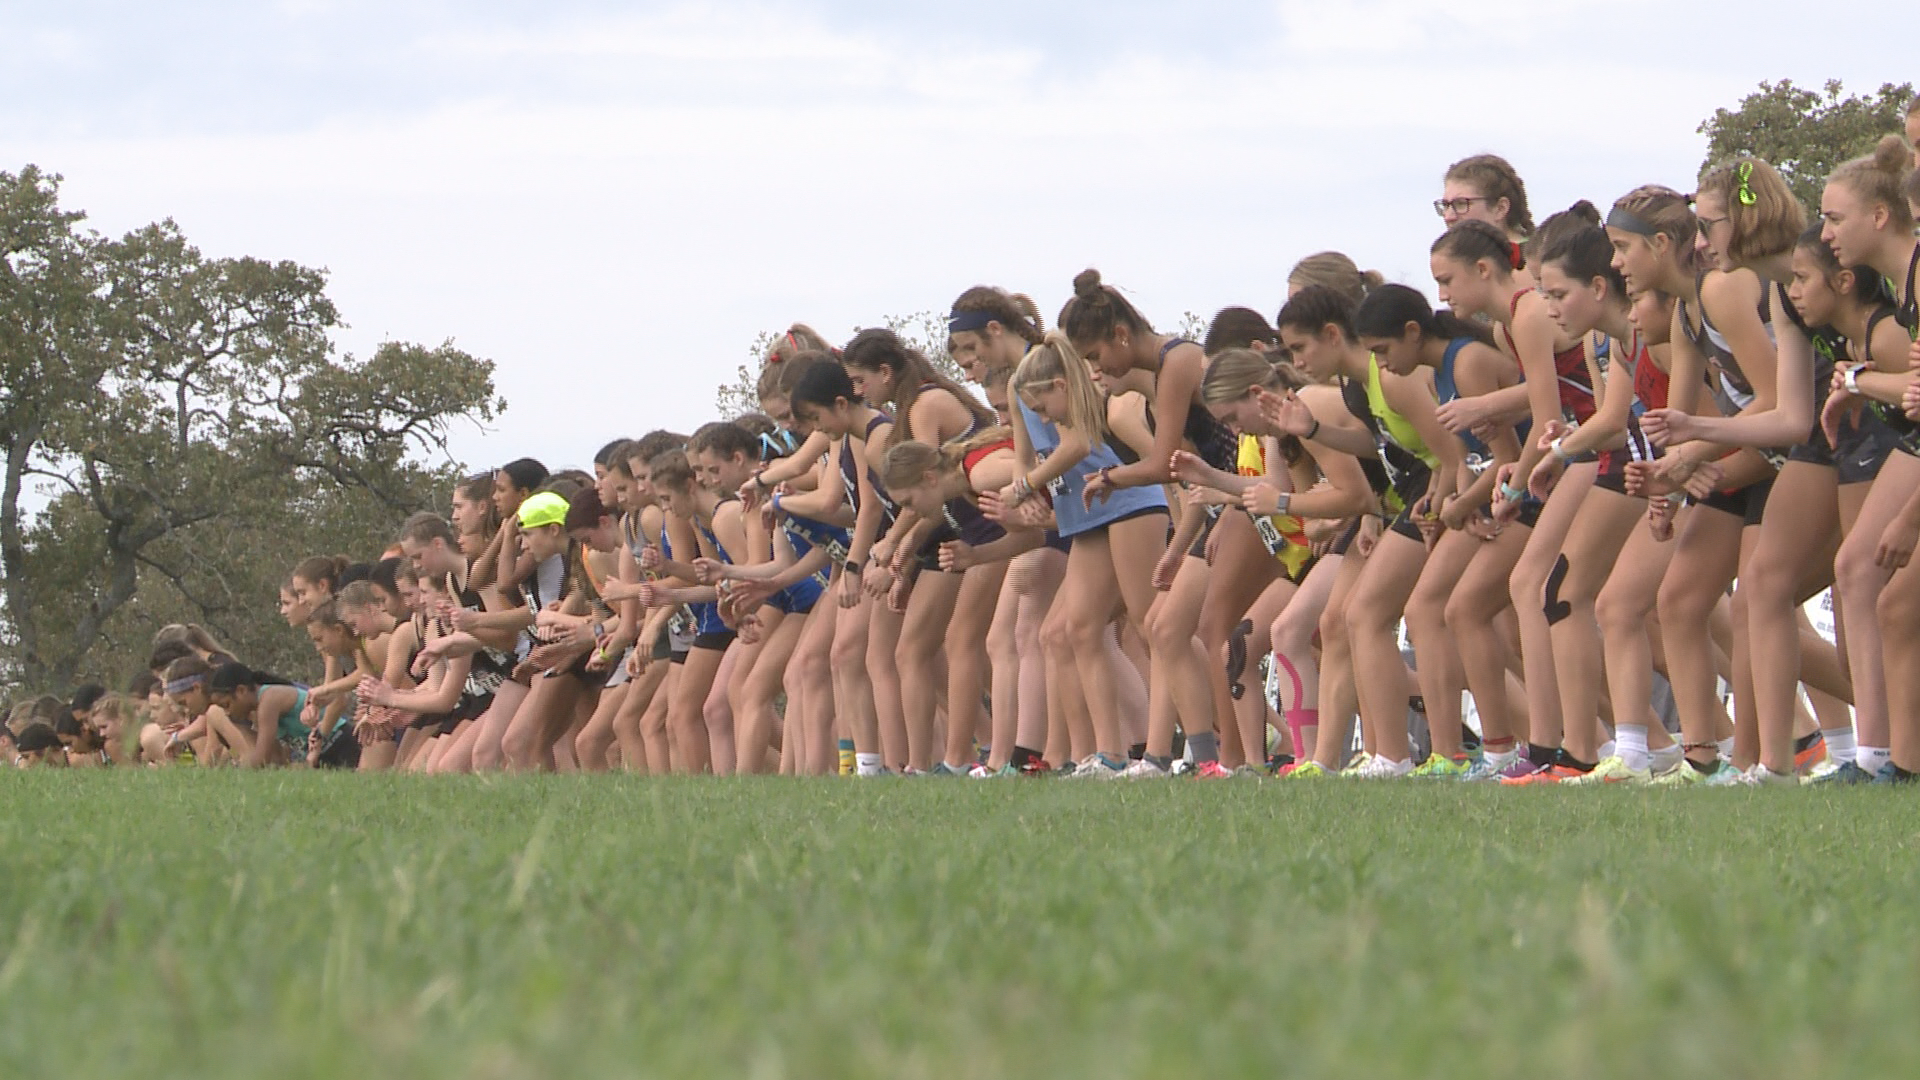 USATF athletes participating in Junior Olympics receiving daily testing